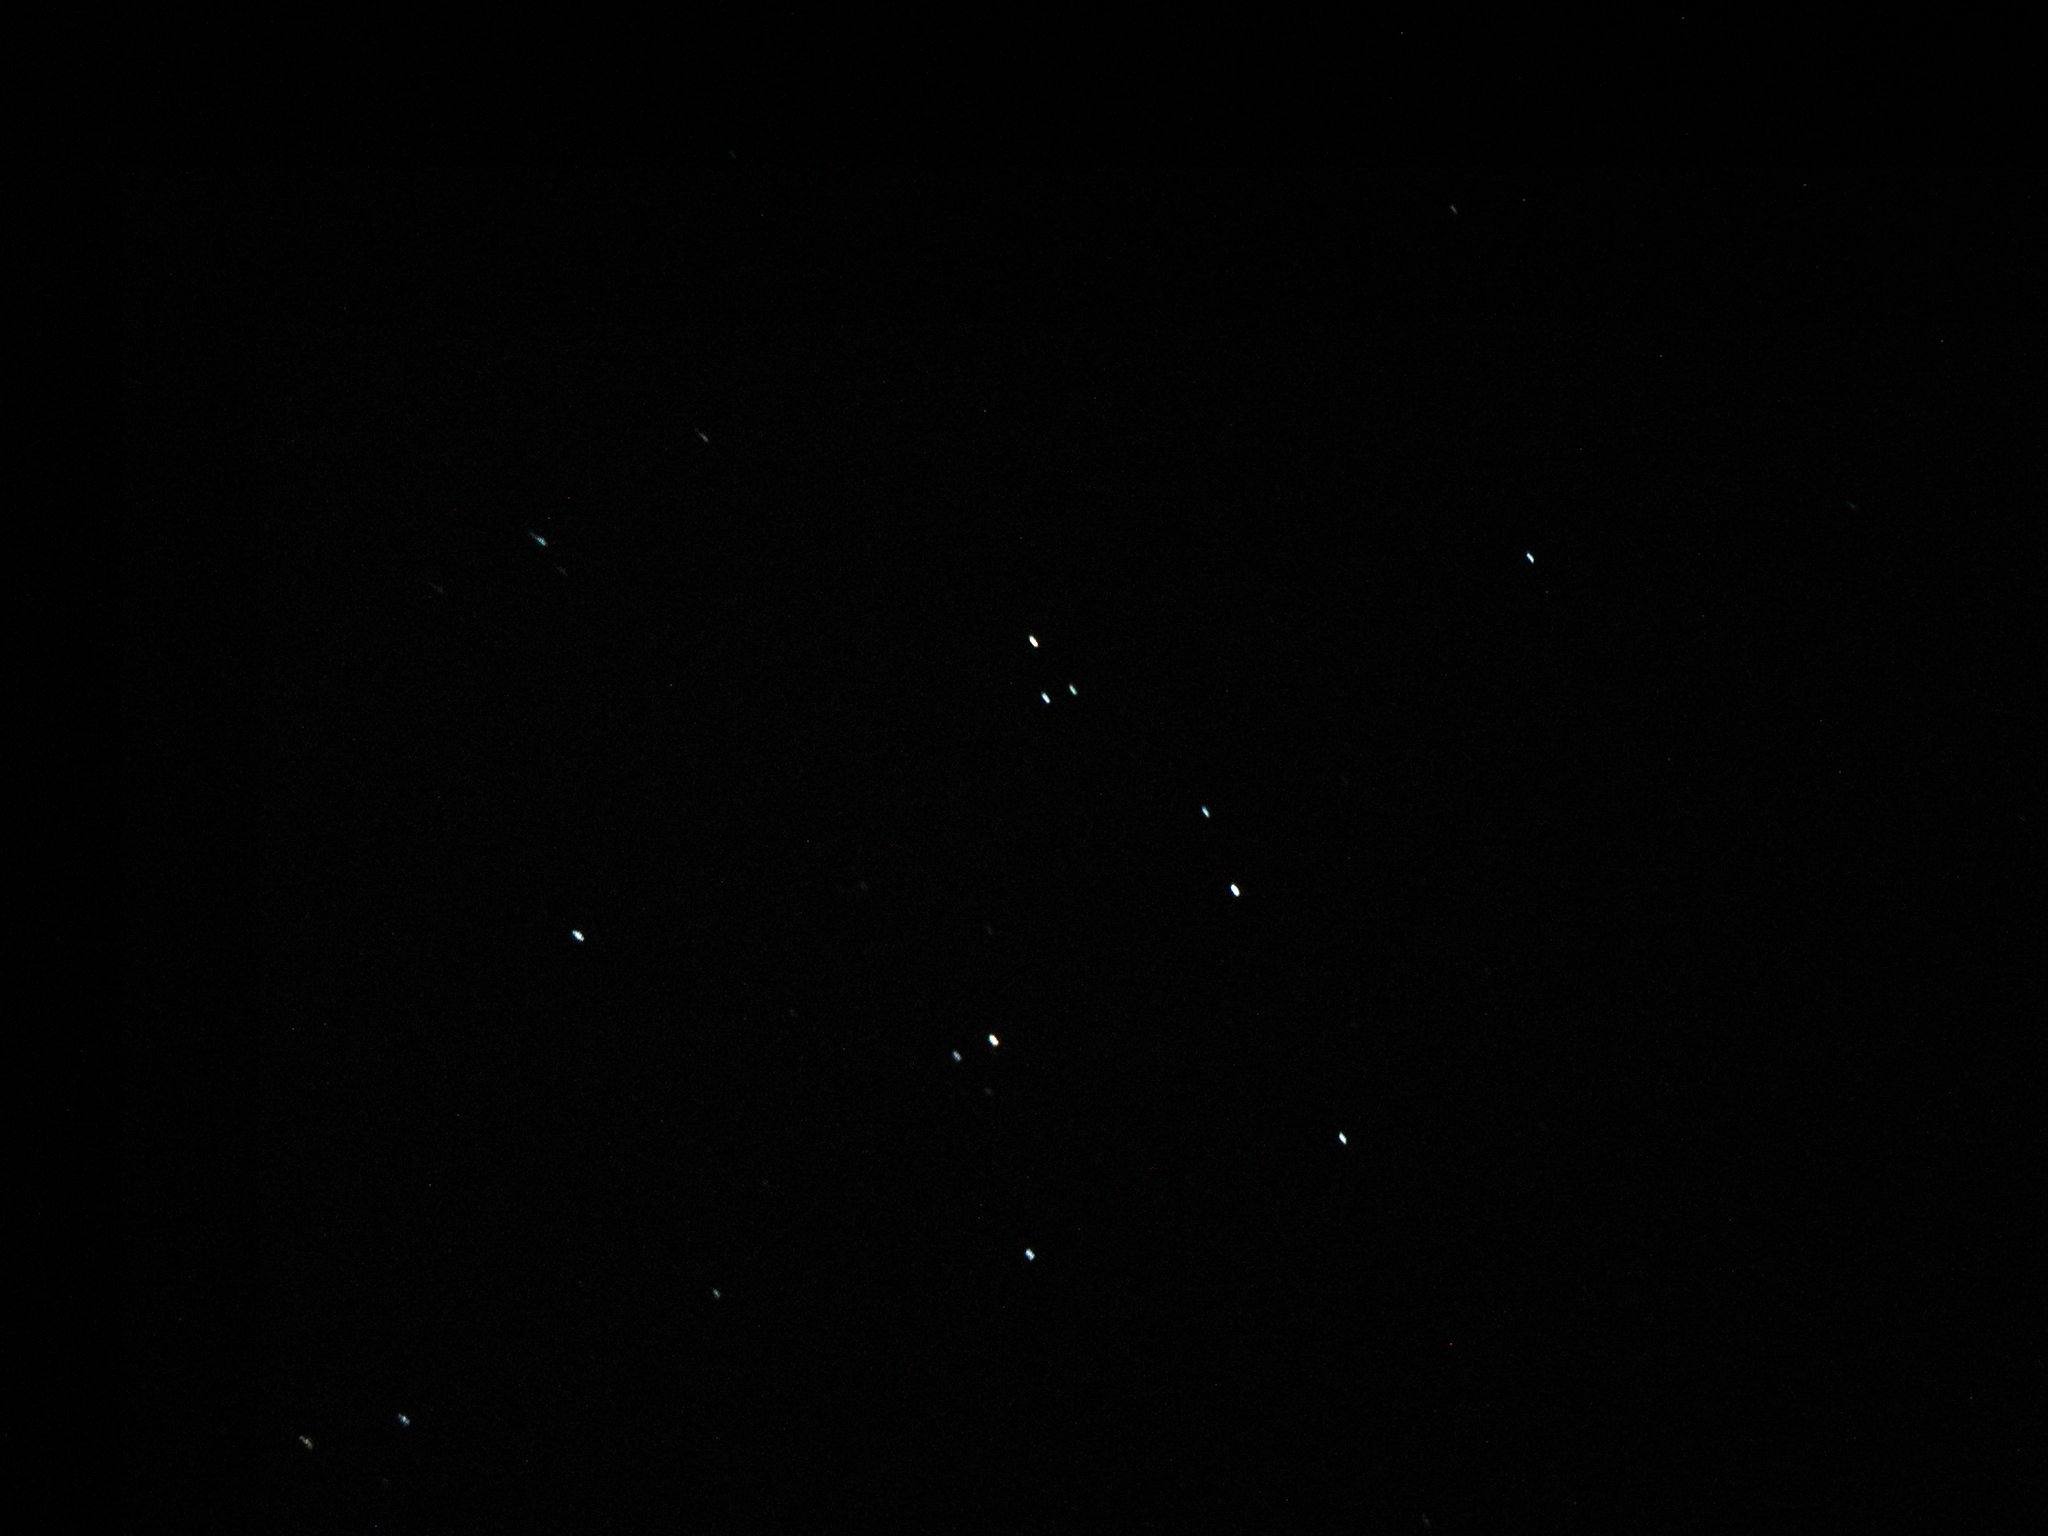 M44 through a Celestron Powerseeker 4.5 with eyepiece projection on a Meade 4000 series 26mm Plossl